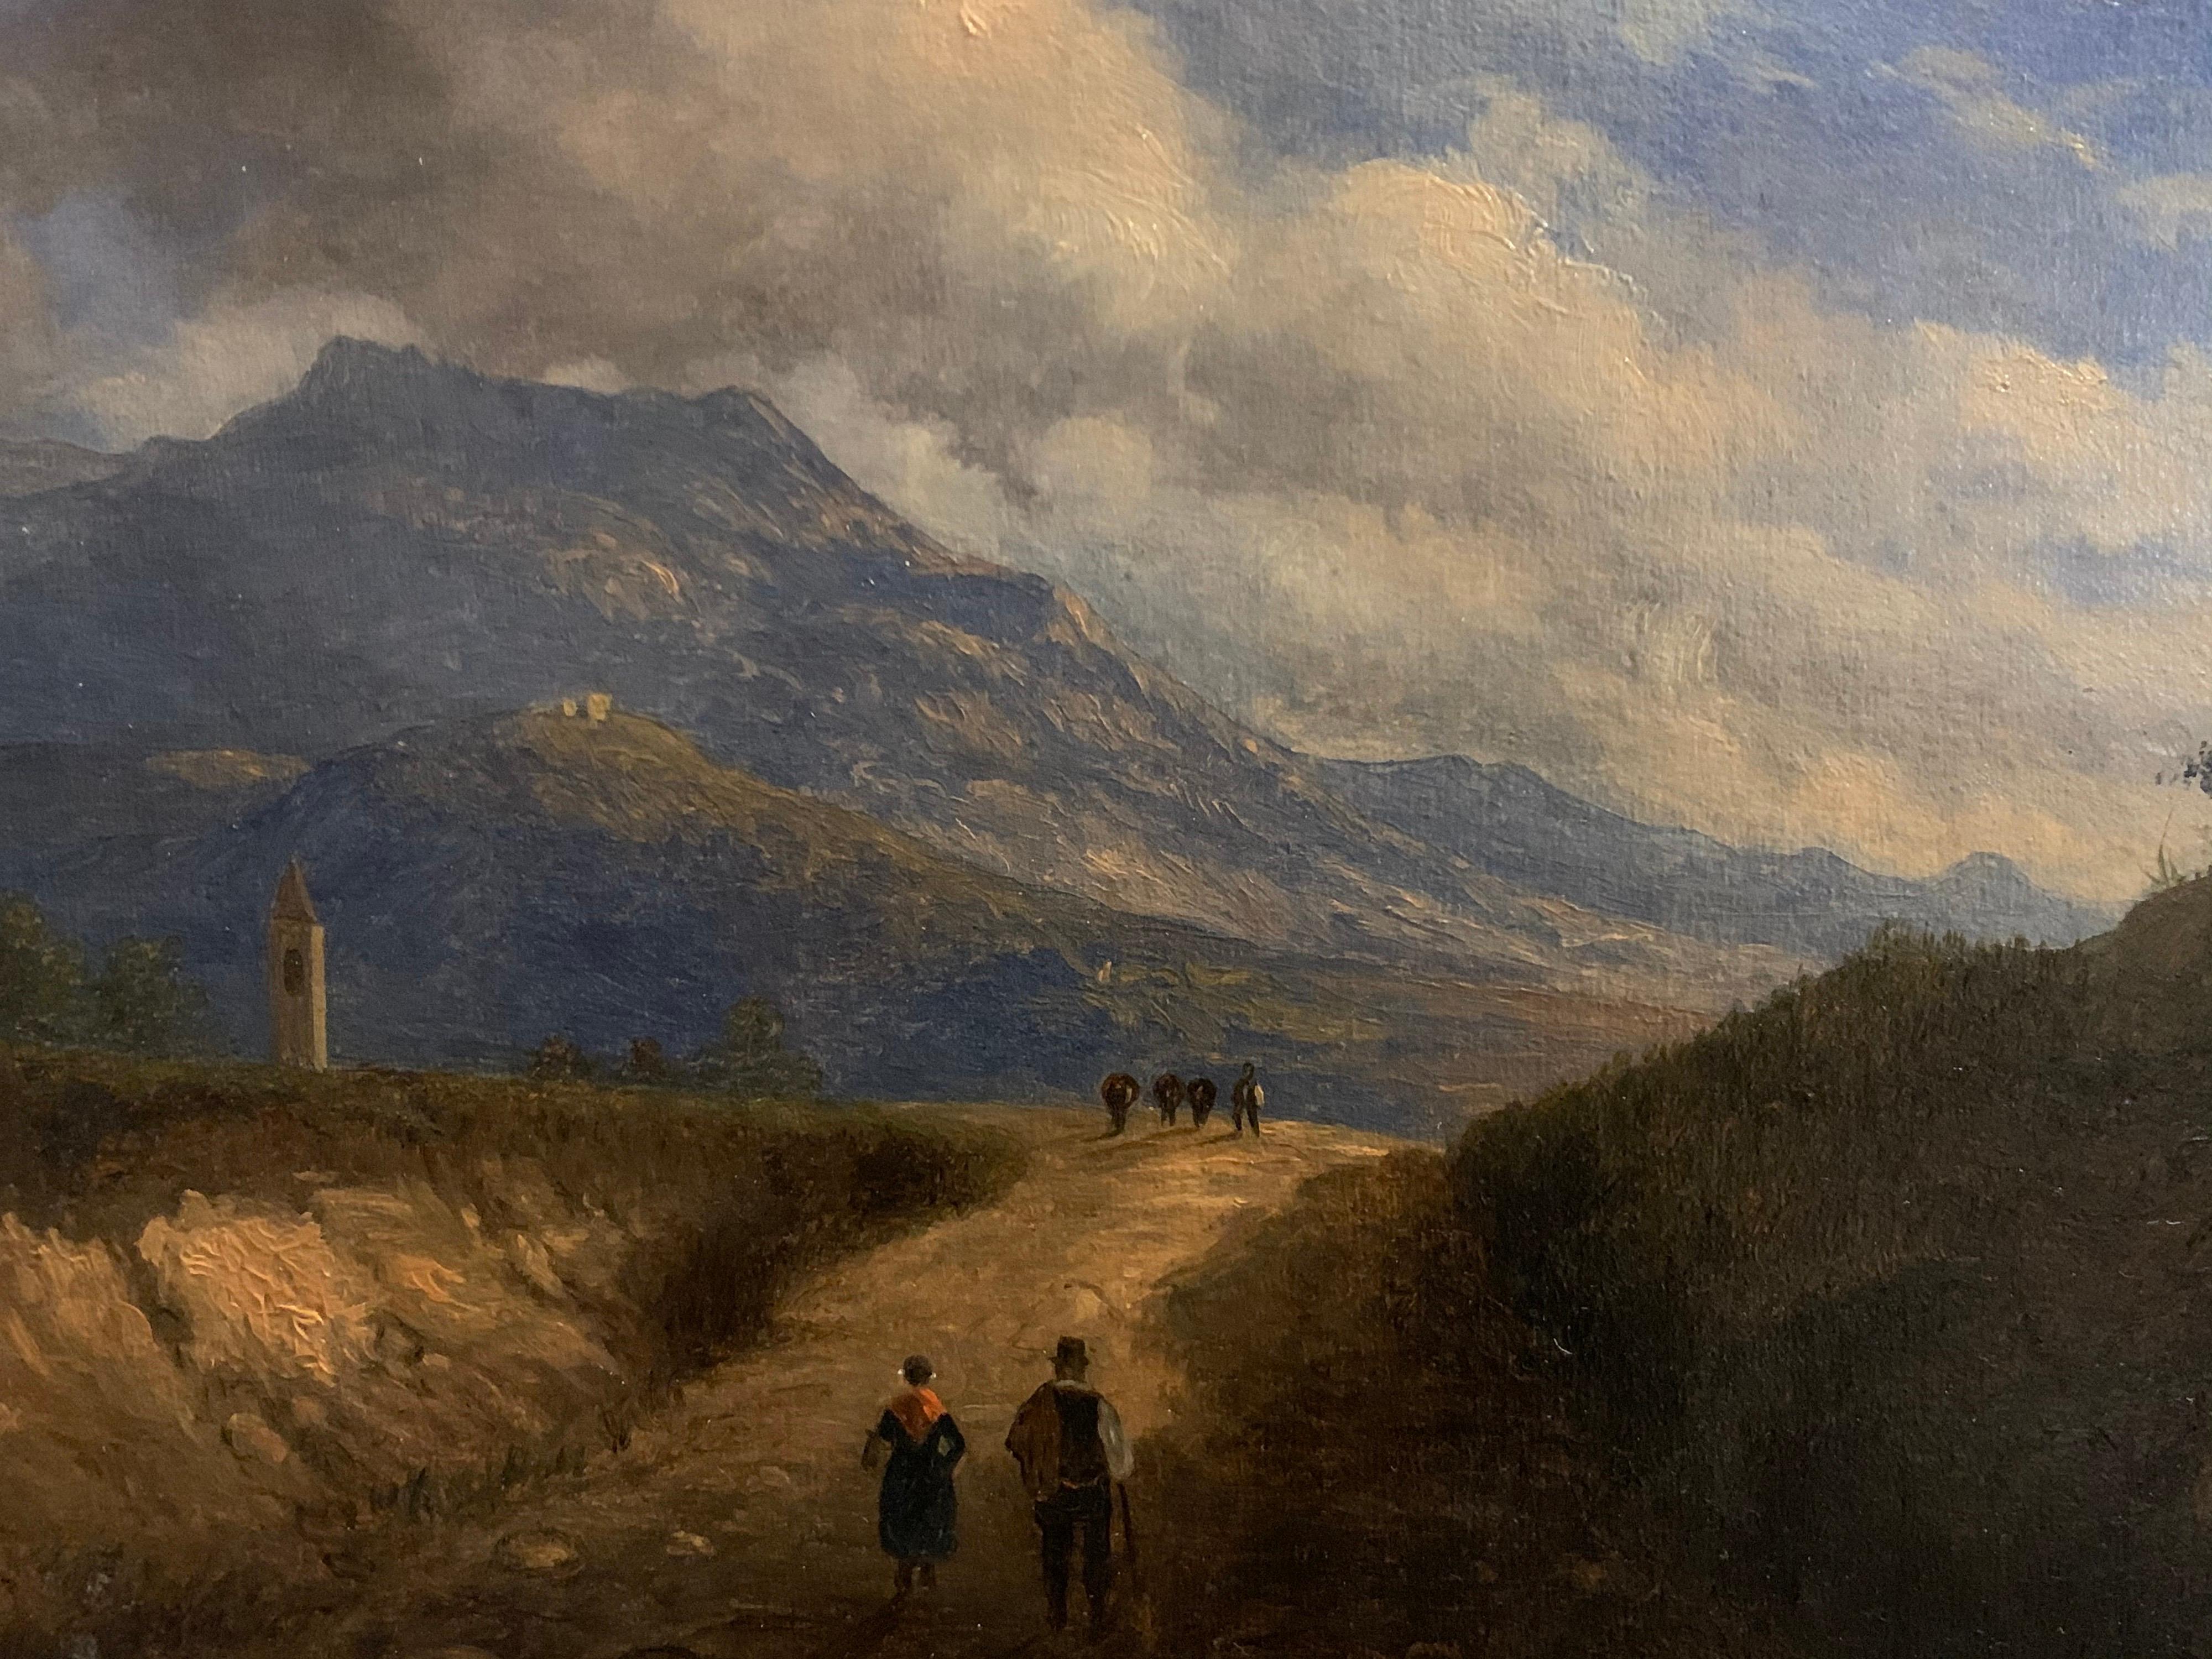 Italian School, early 19th century
The Mountain Pass
inscribed and titled indistinctly verso
oil painting on canvas, framed (wooden)
overall measurements: 22cm x 30cm
condition: very good, a few very tiny scufffs left edge

provenance: private